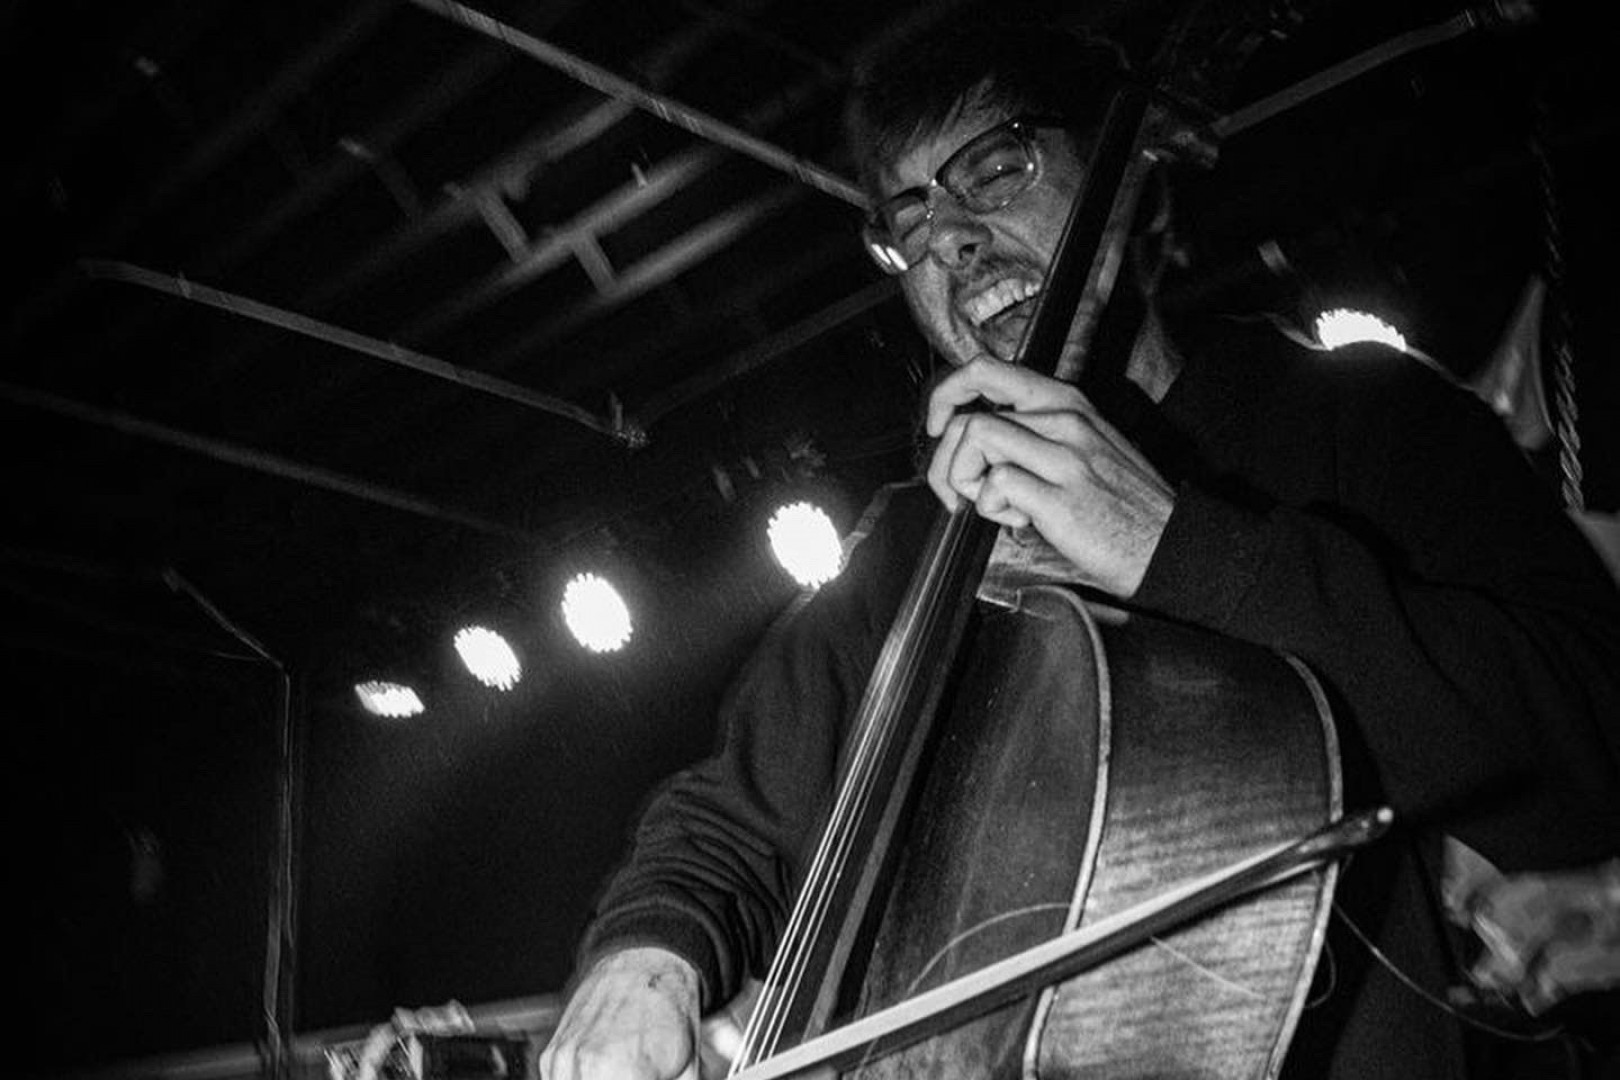 Getting to know the Punk Cellist